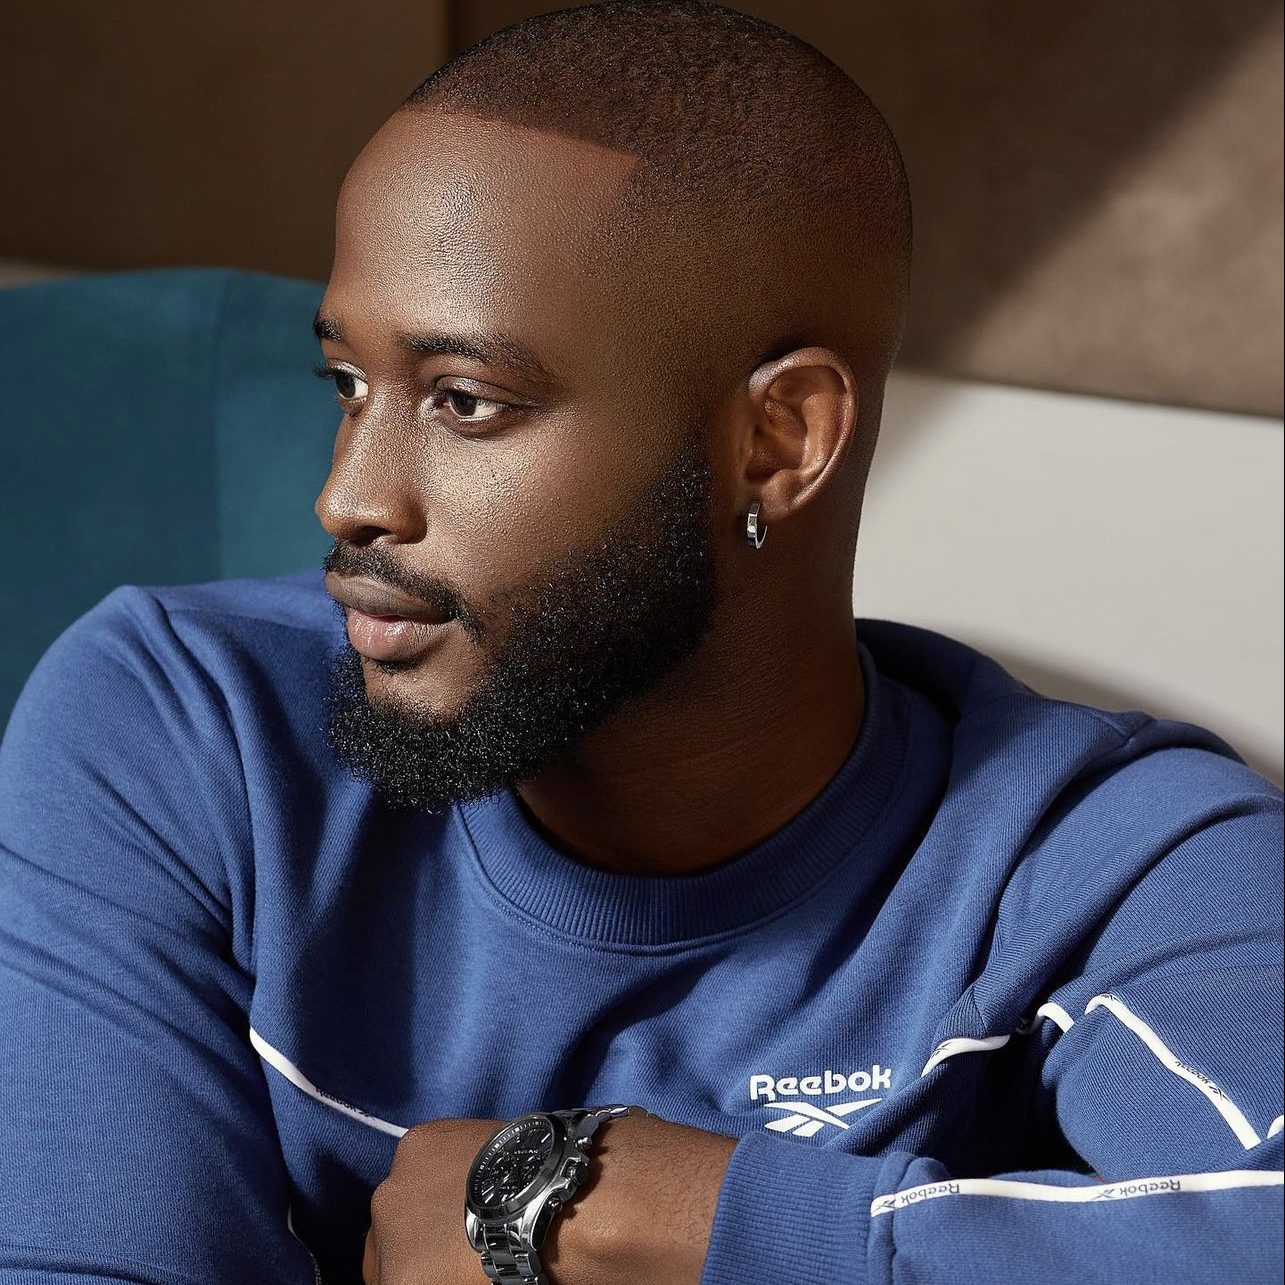 emmanuel-taymesan-temisan-shows-how-to-grow-beard-with-grooming-tips-for-black-men